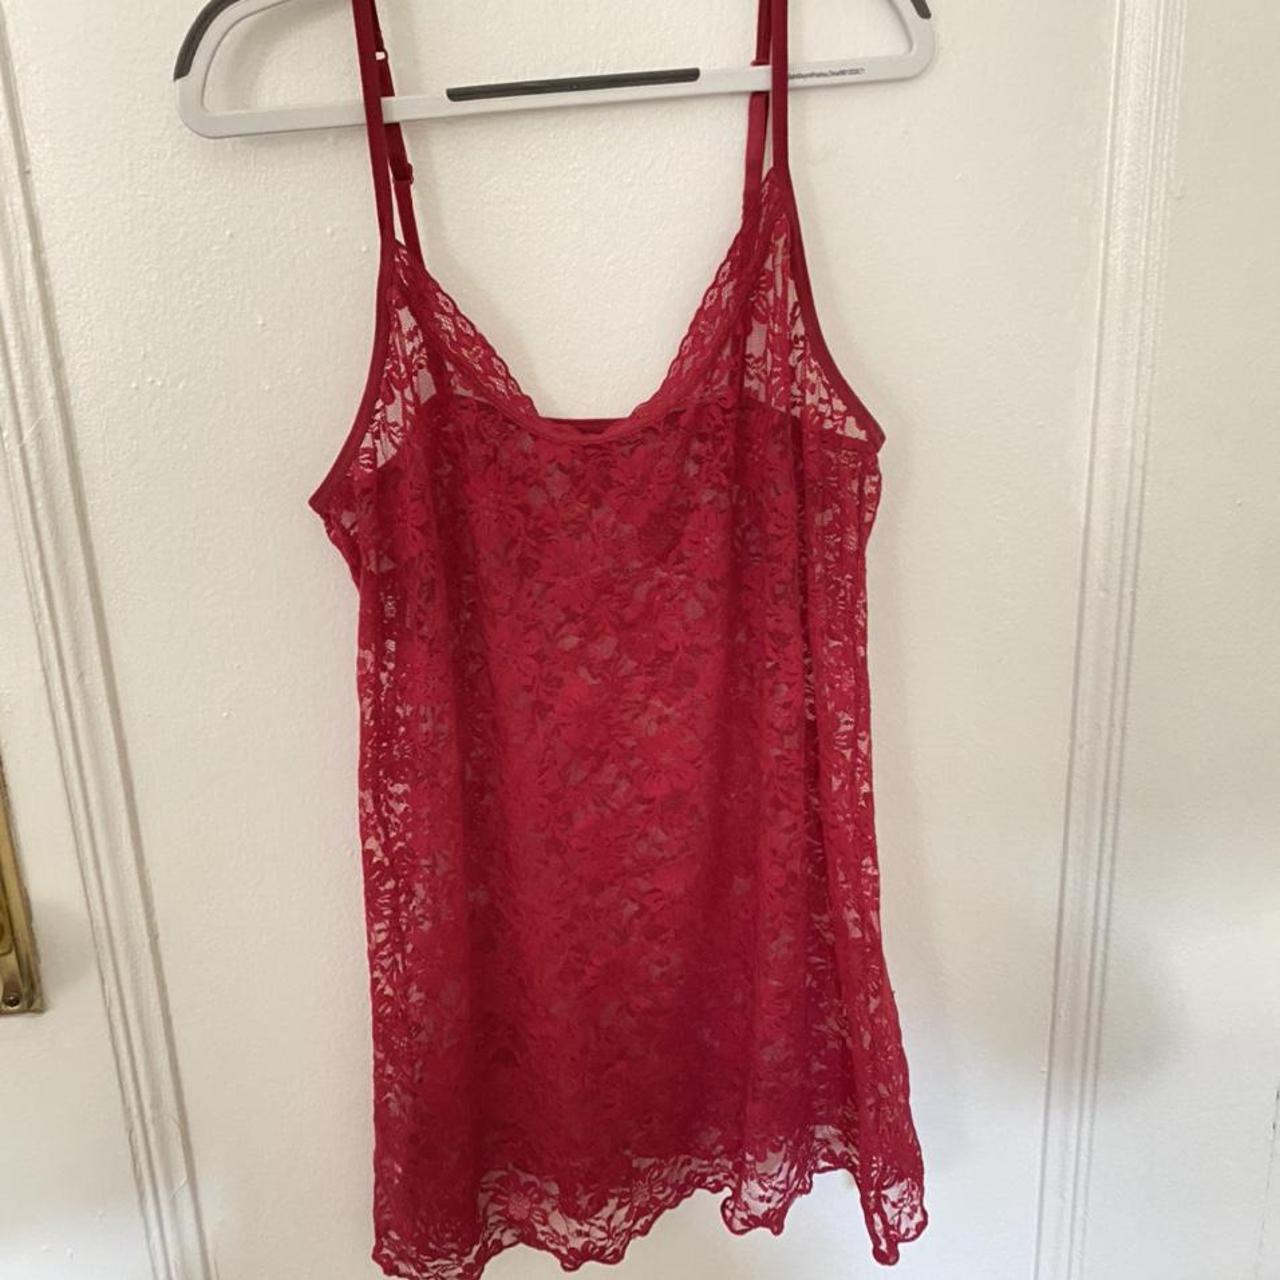 Red lace top - Depop